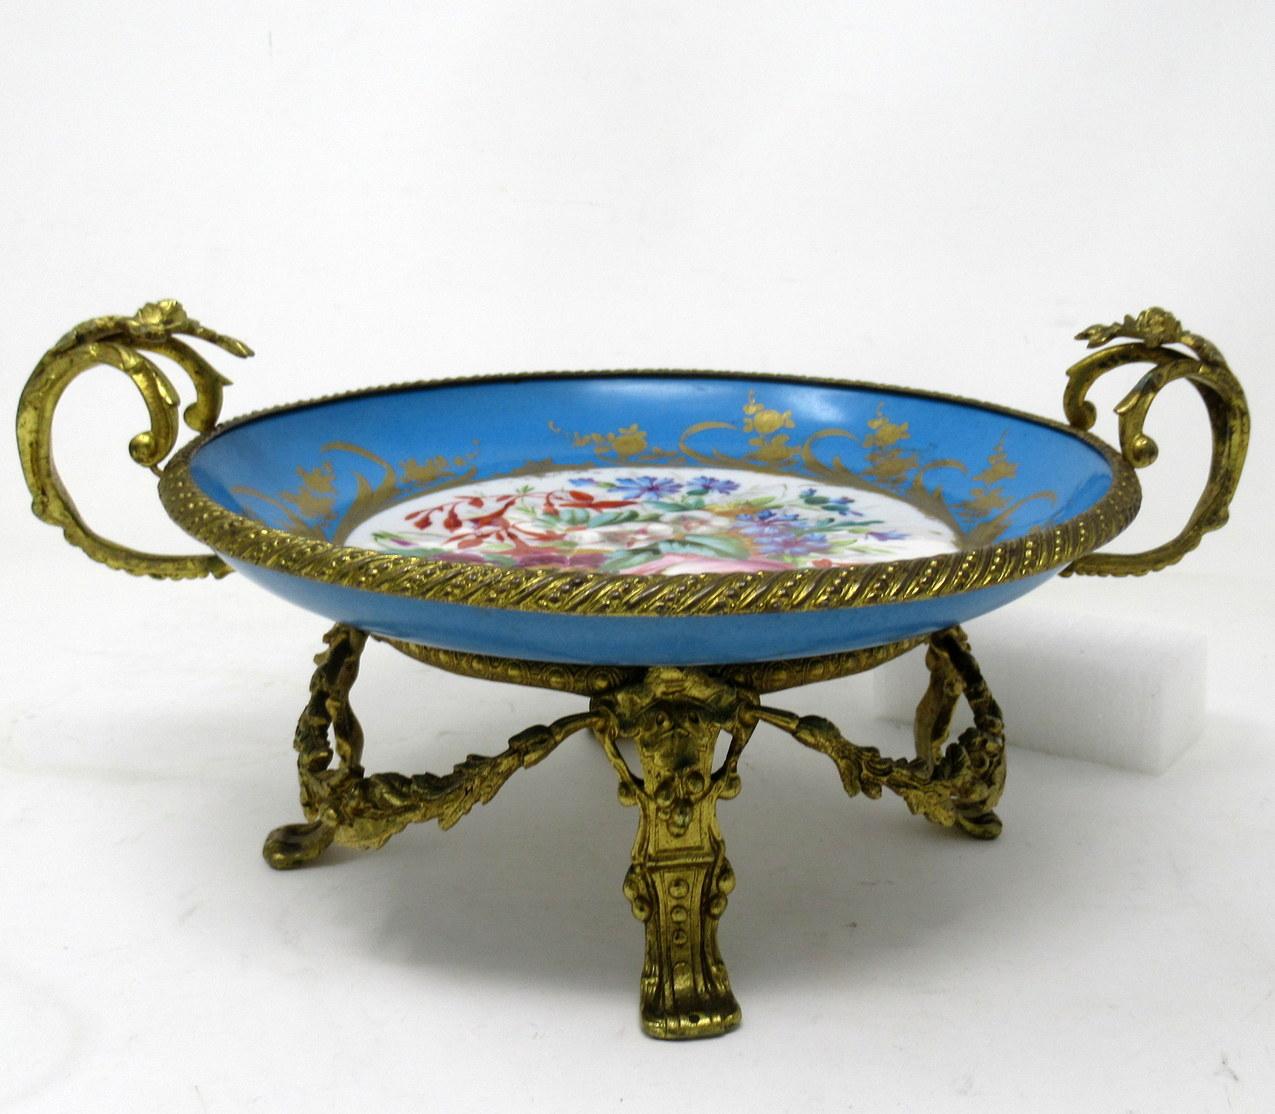 Antique French Sevres Ormolu Gilt Bronze Dore Porcelain Tazza Cabinet Plate Dish For Sale 1